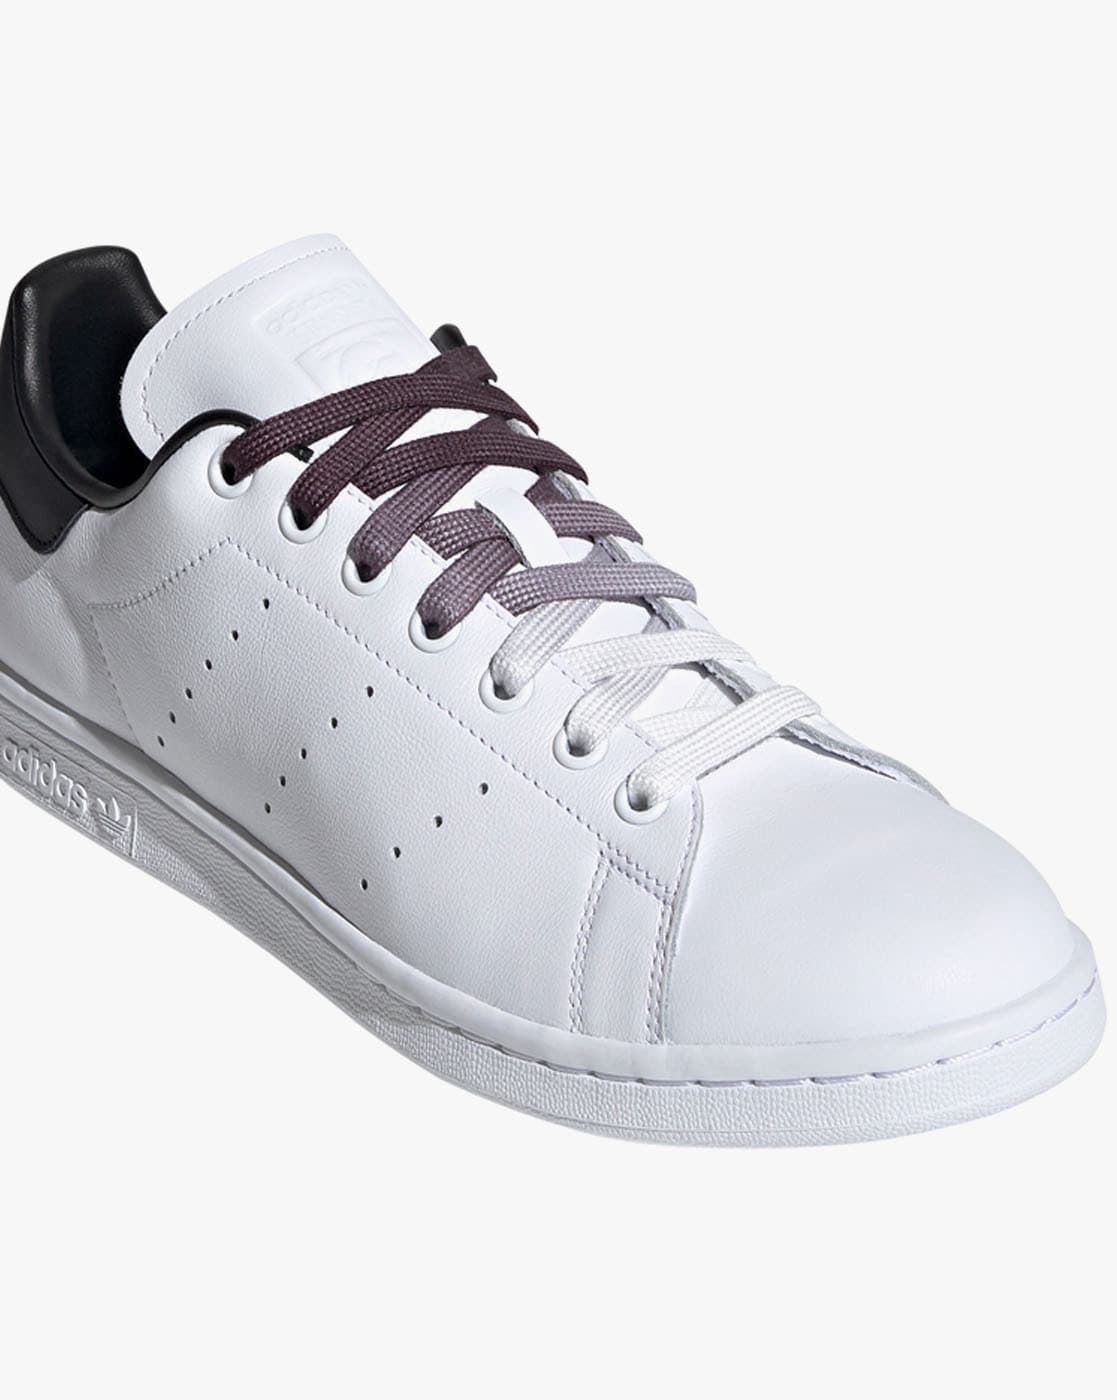 adidas stan smith price in india